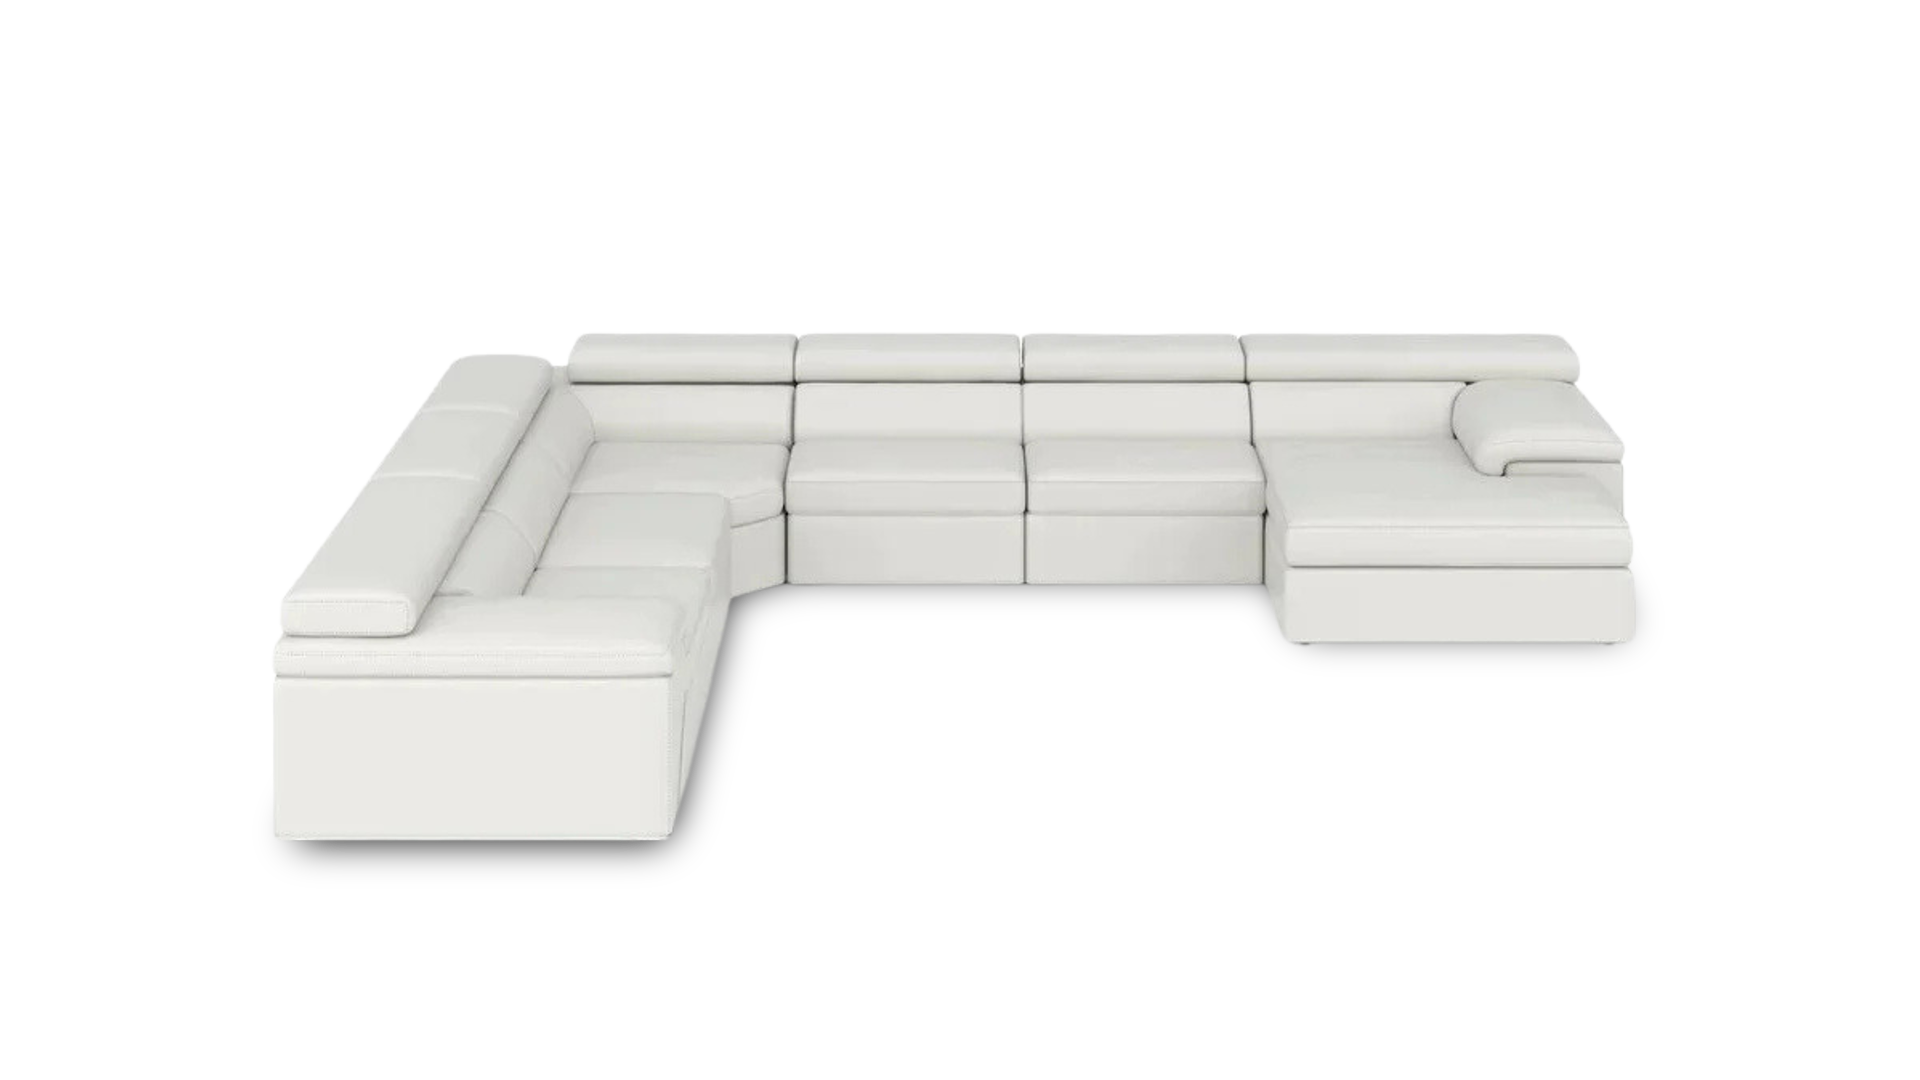 Isabella Sectional